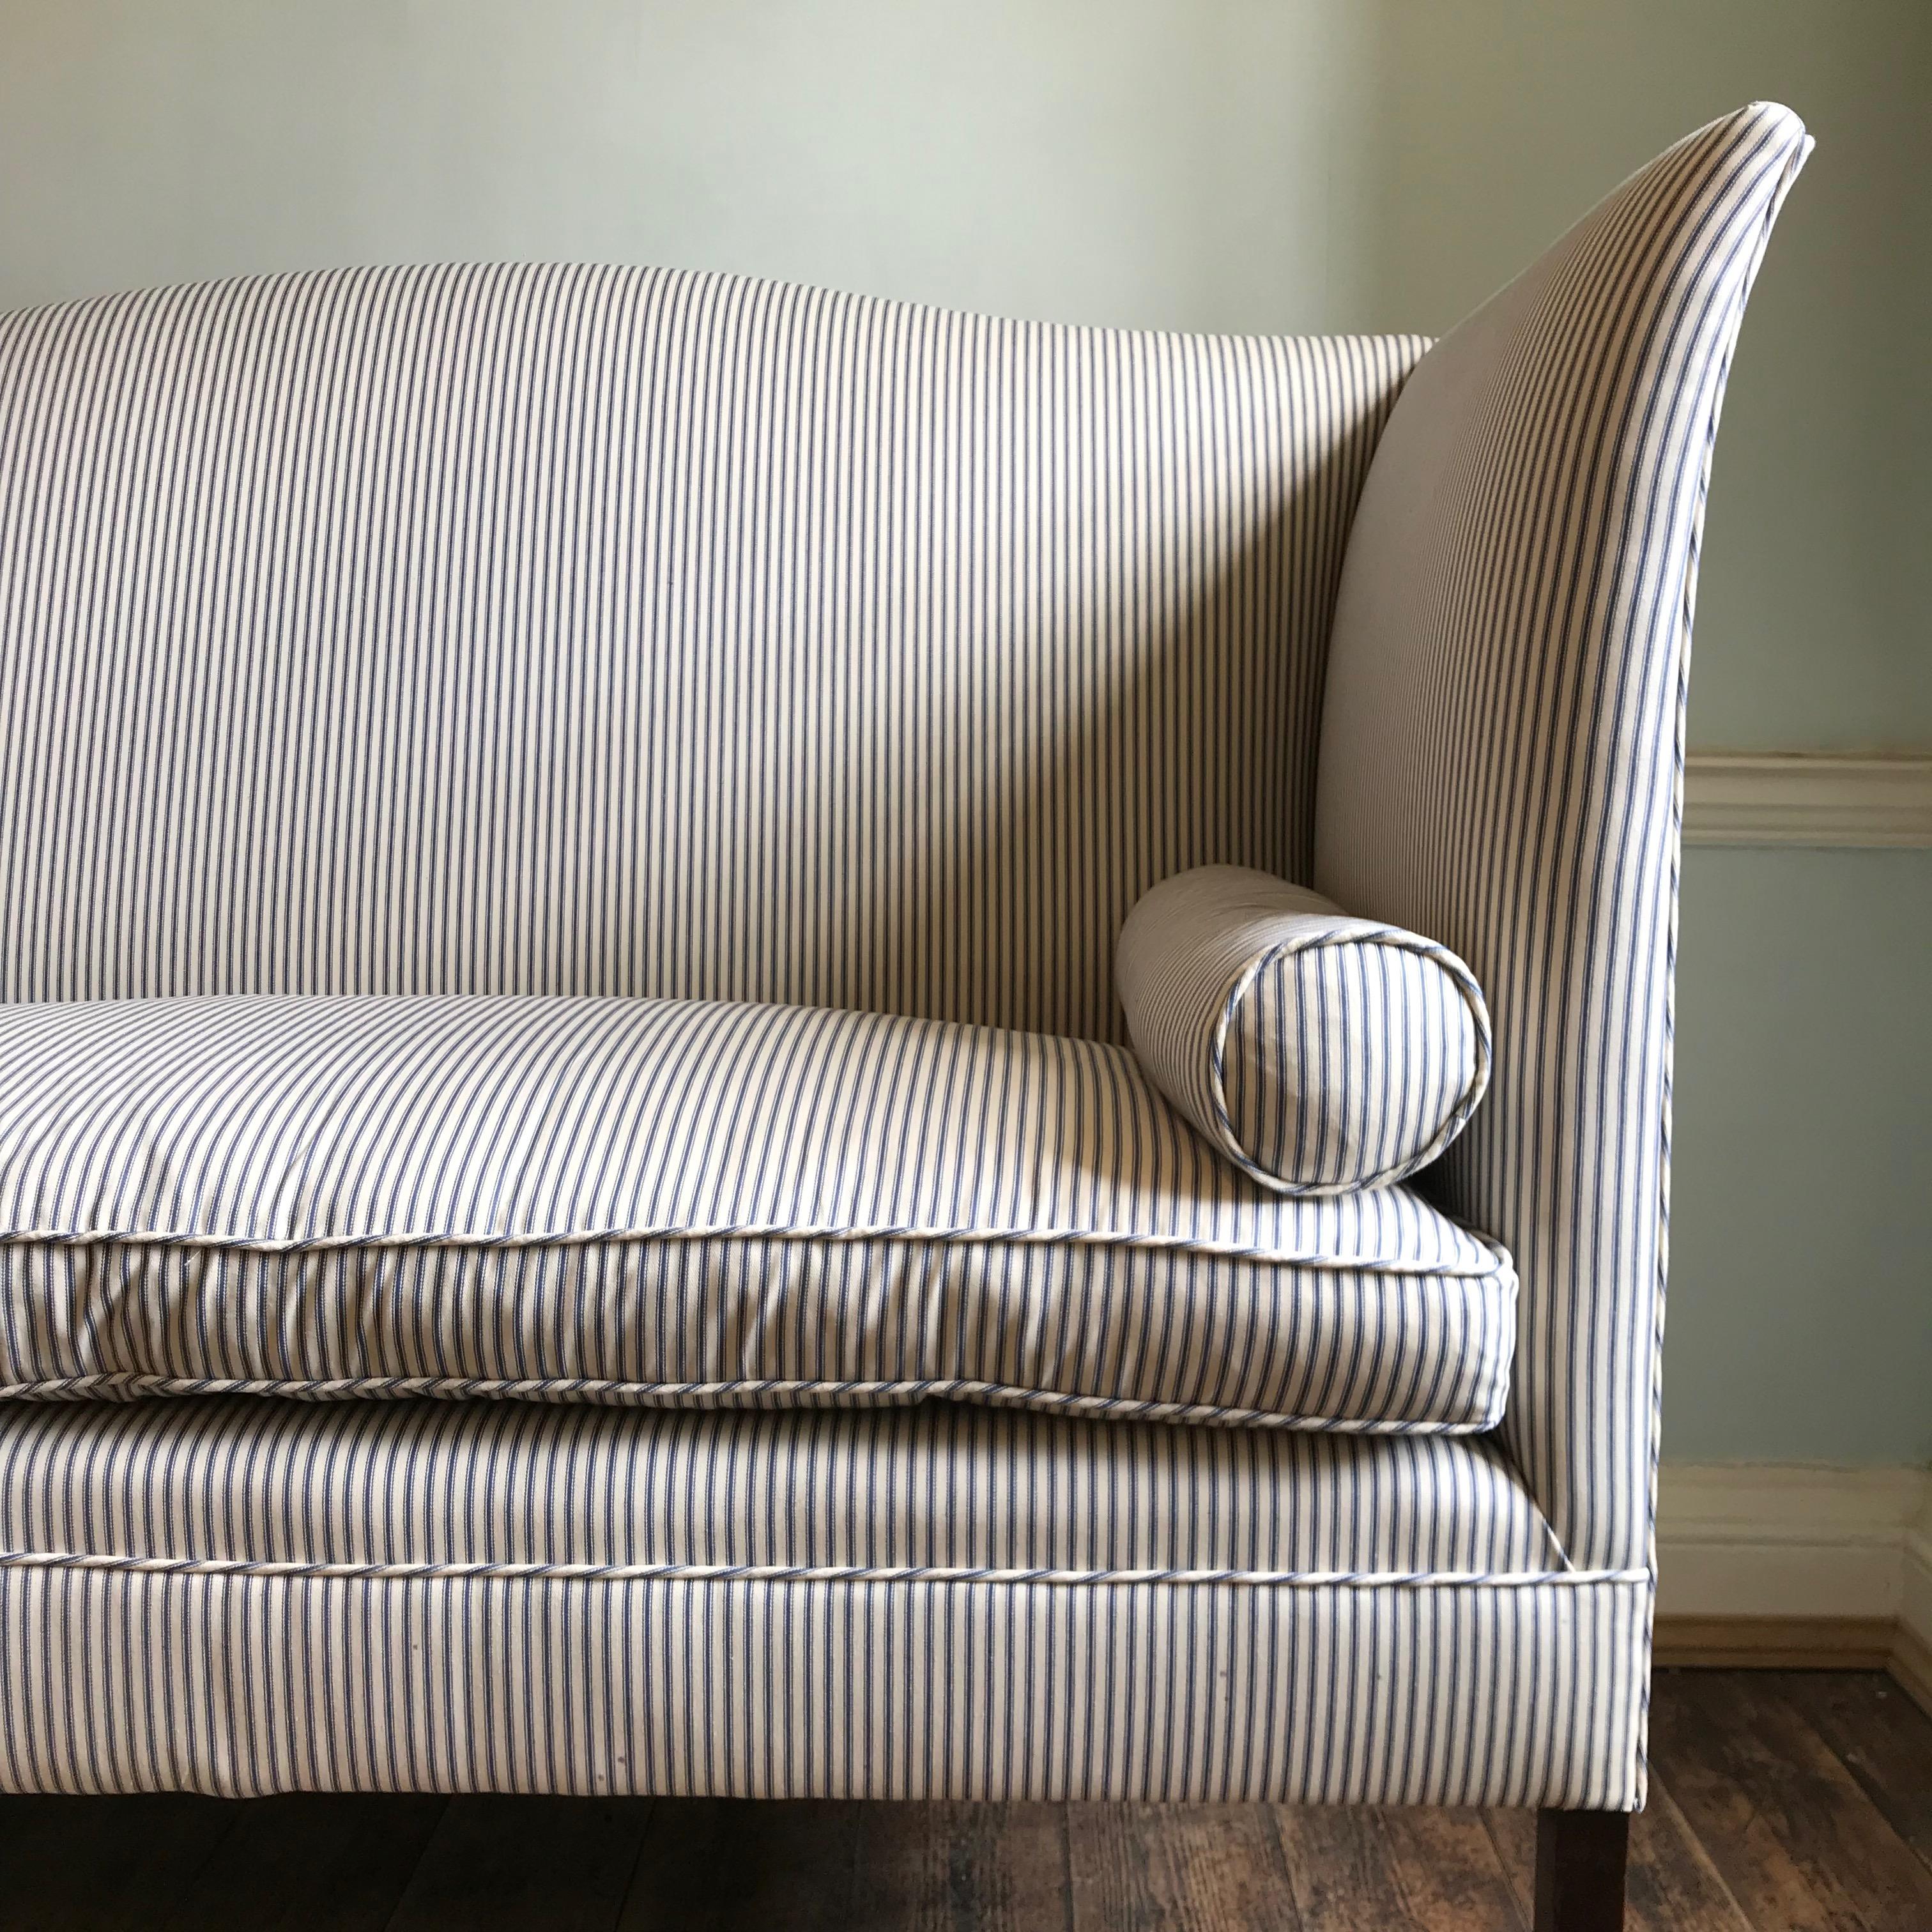 20th Century Edwardian Period Wingback Sofa Newly Upholstered in Striped Ticking For Sale